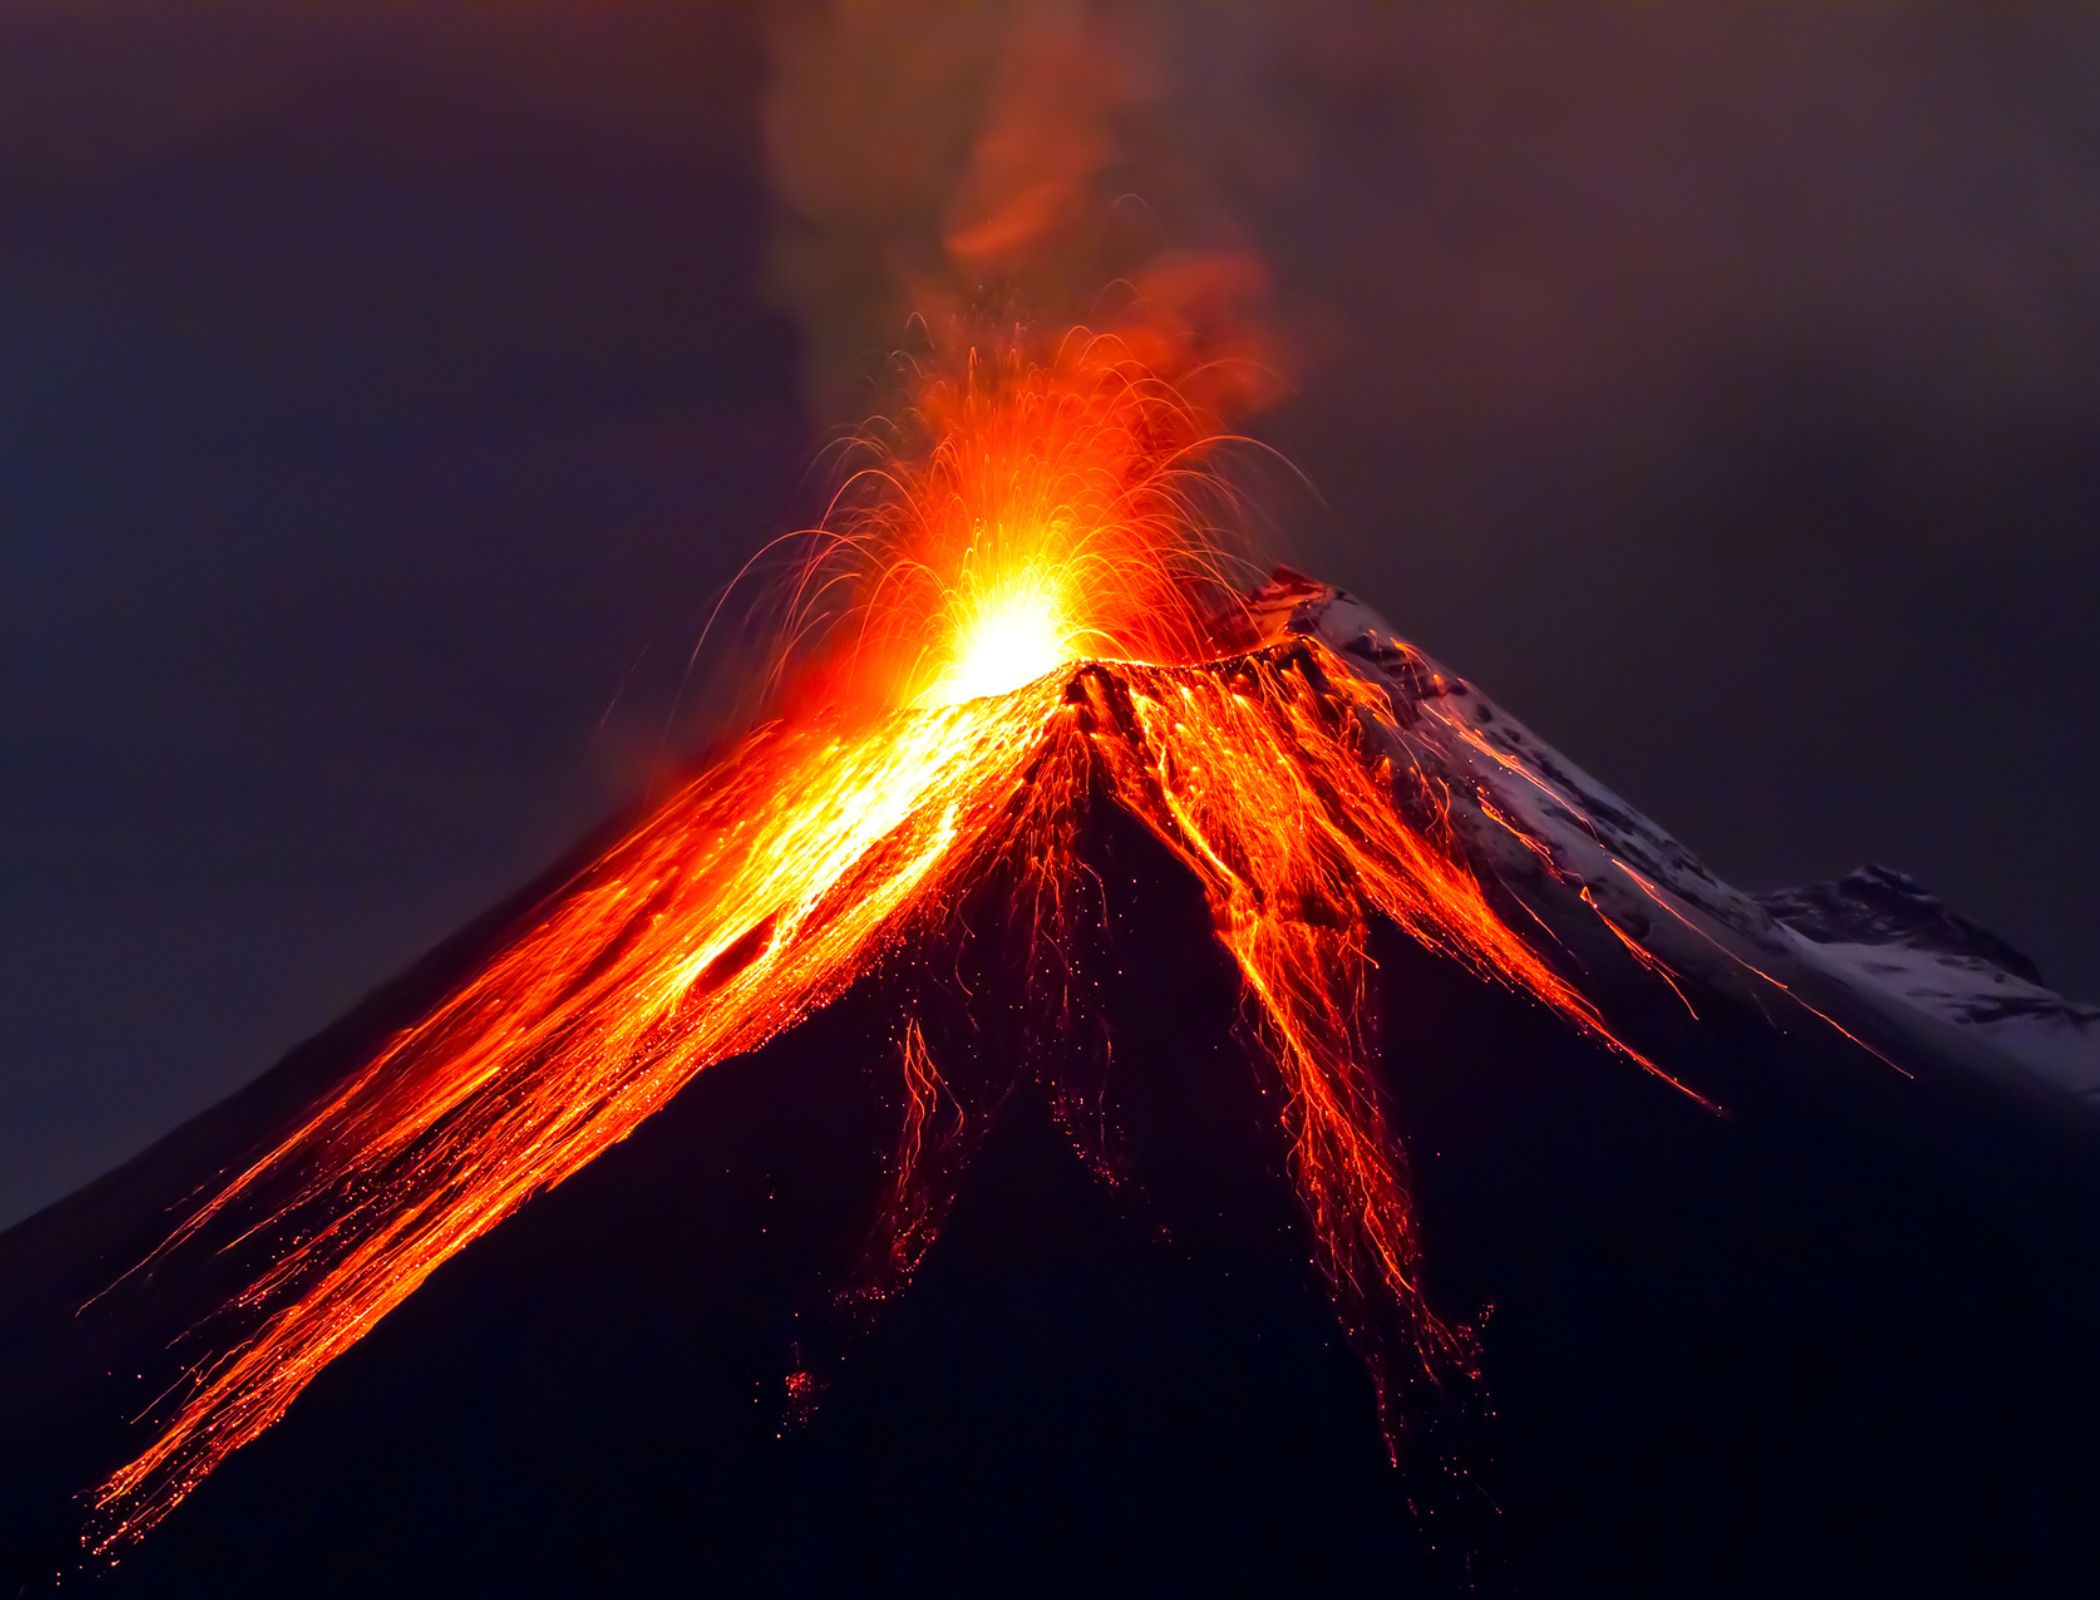 Blasting lava with lasers could help predict volcanic eruptions, scientists say